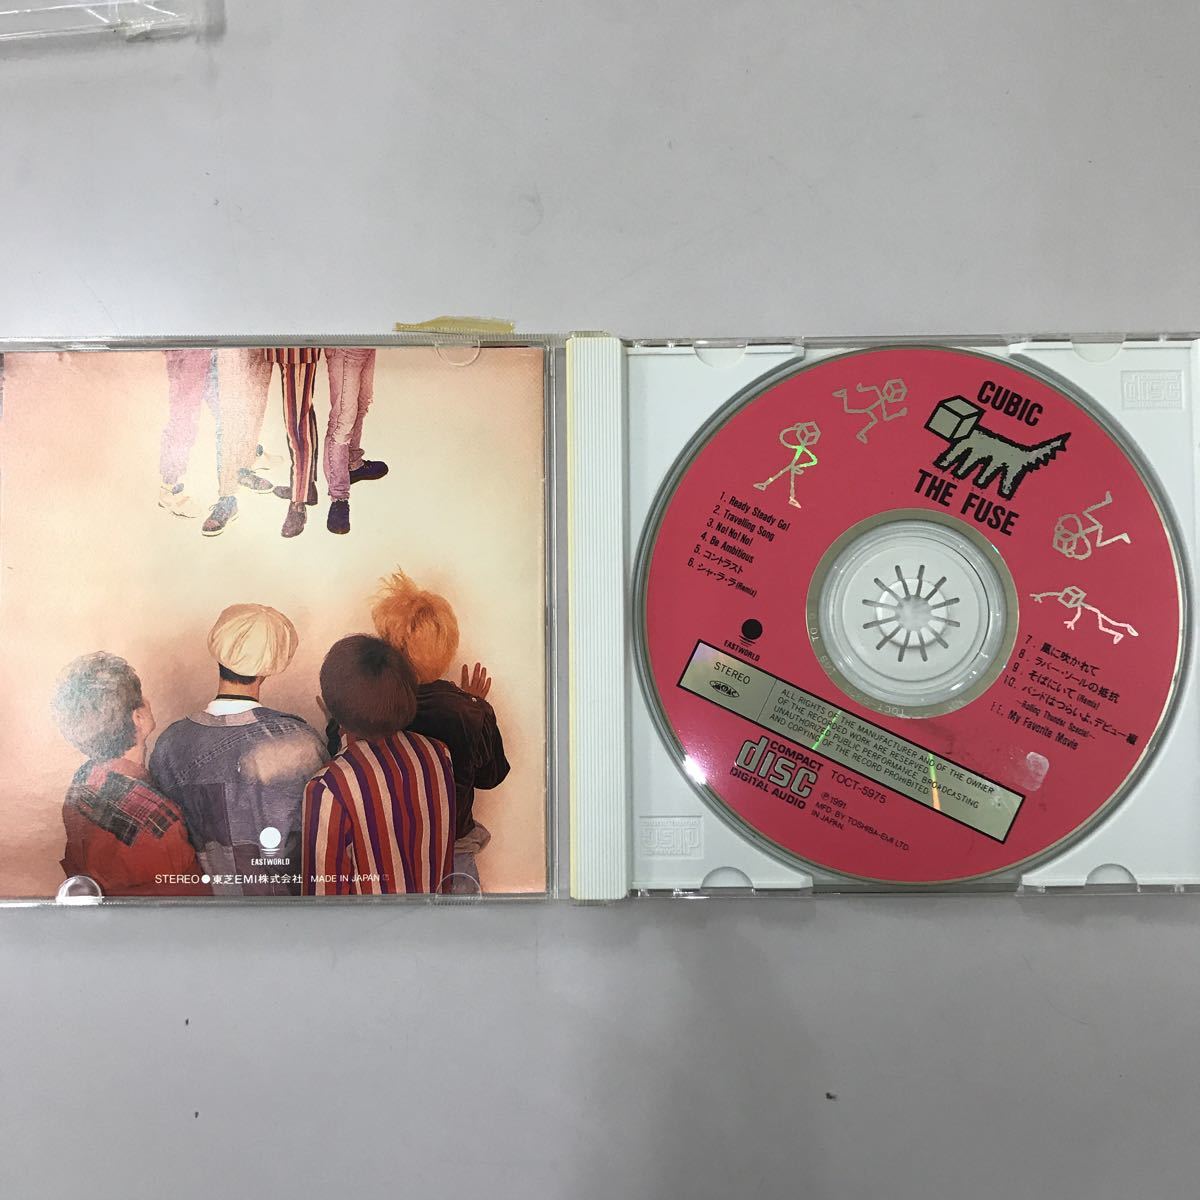 CD 中古☆【邦楽】THE FUSE CUBIC